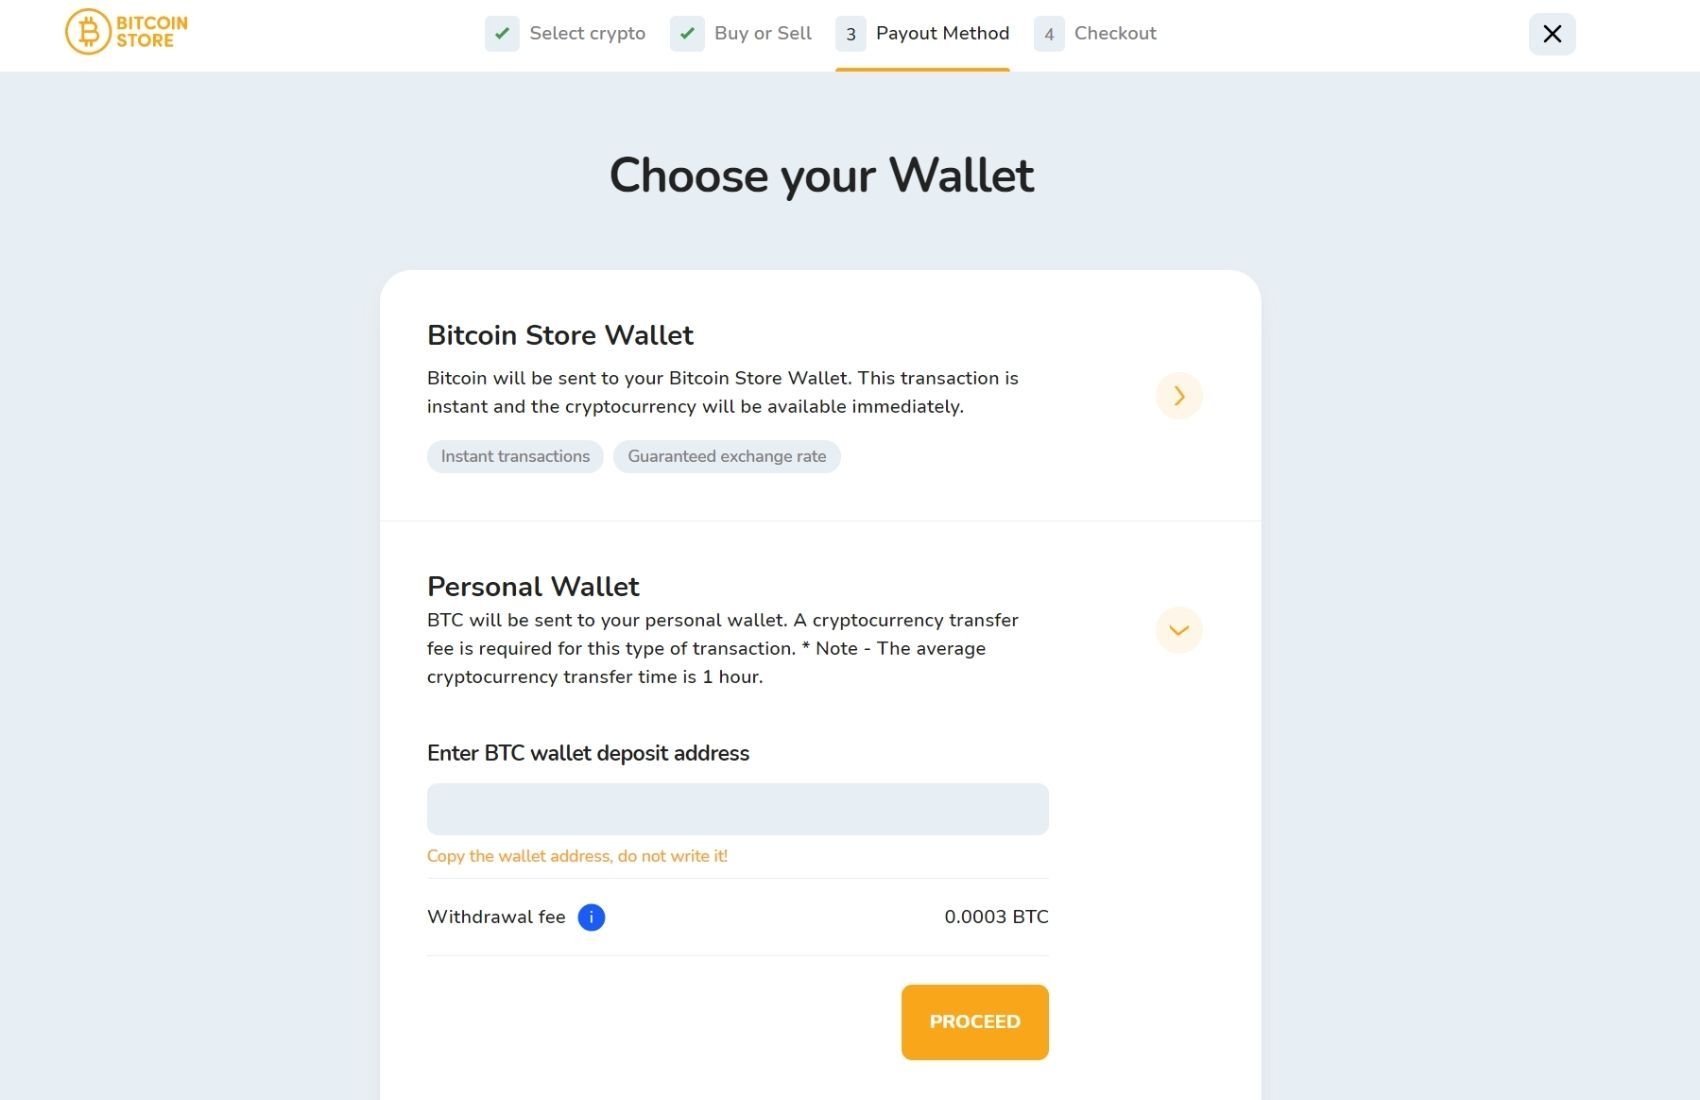 The window for selecting the Wallet as payout method on the Bitcoin Store platform.